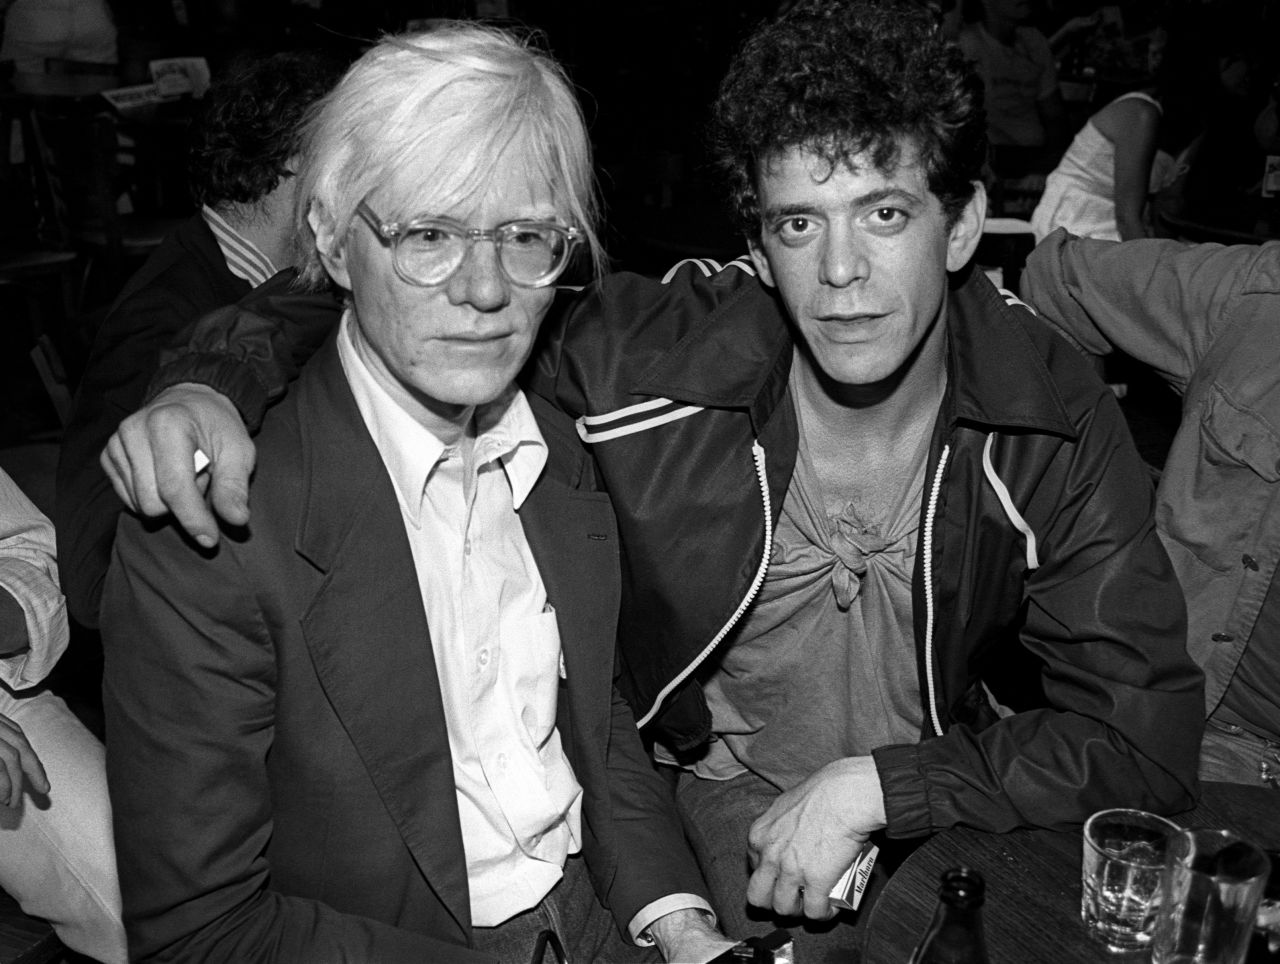 Andy Warhol, left, and Reed at a David Johansen show at the Bottom Line in New York City on July 20, 1978.